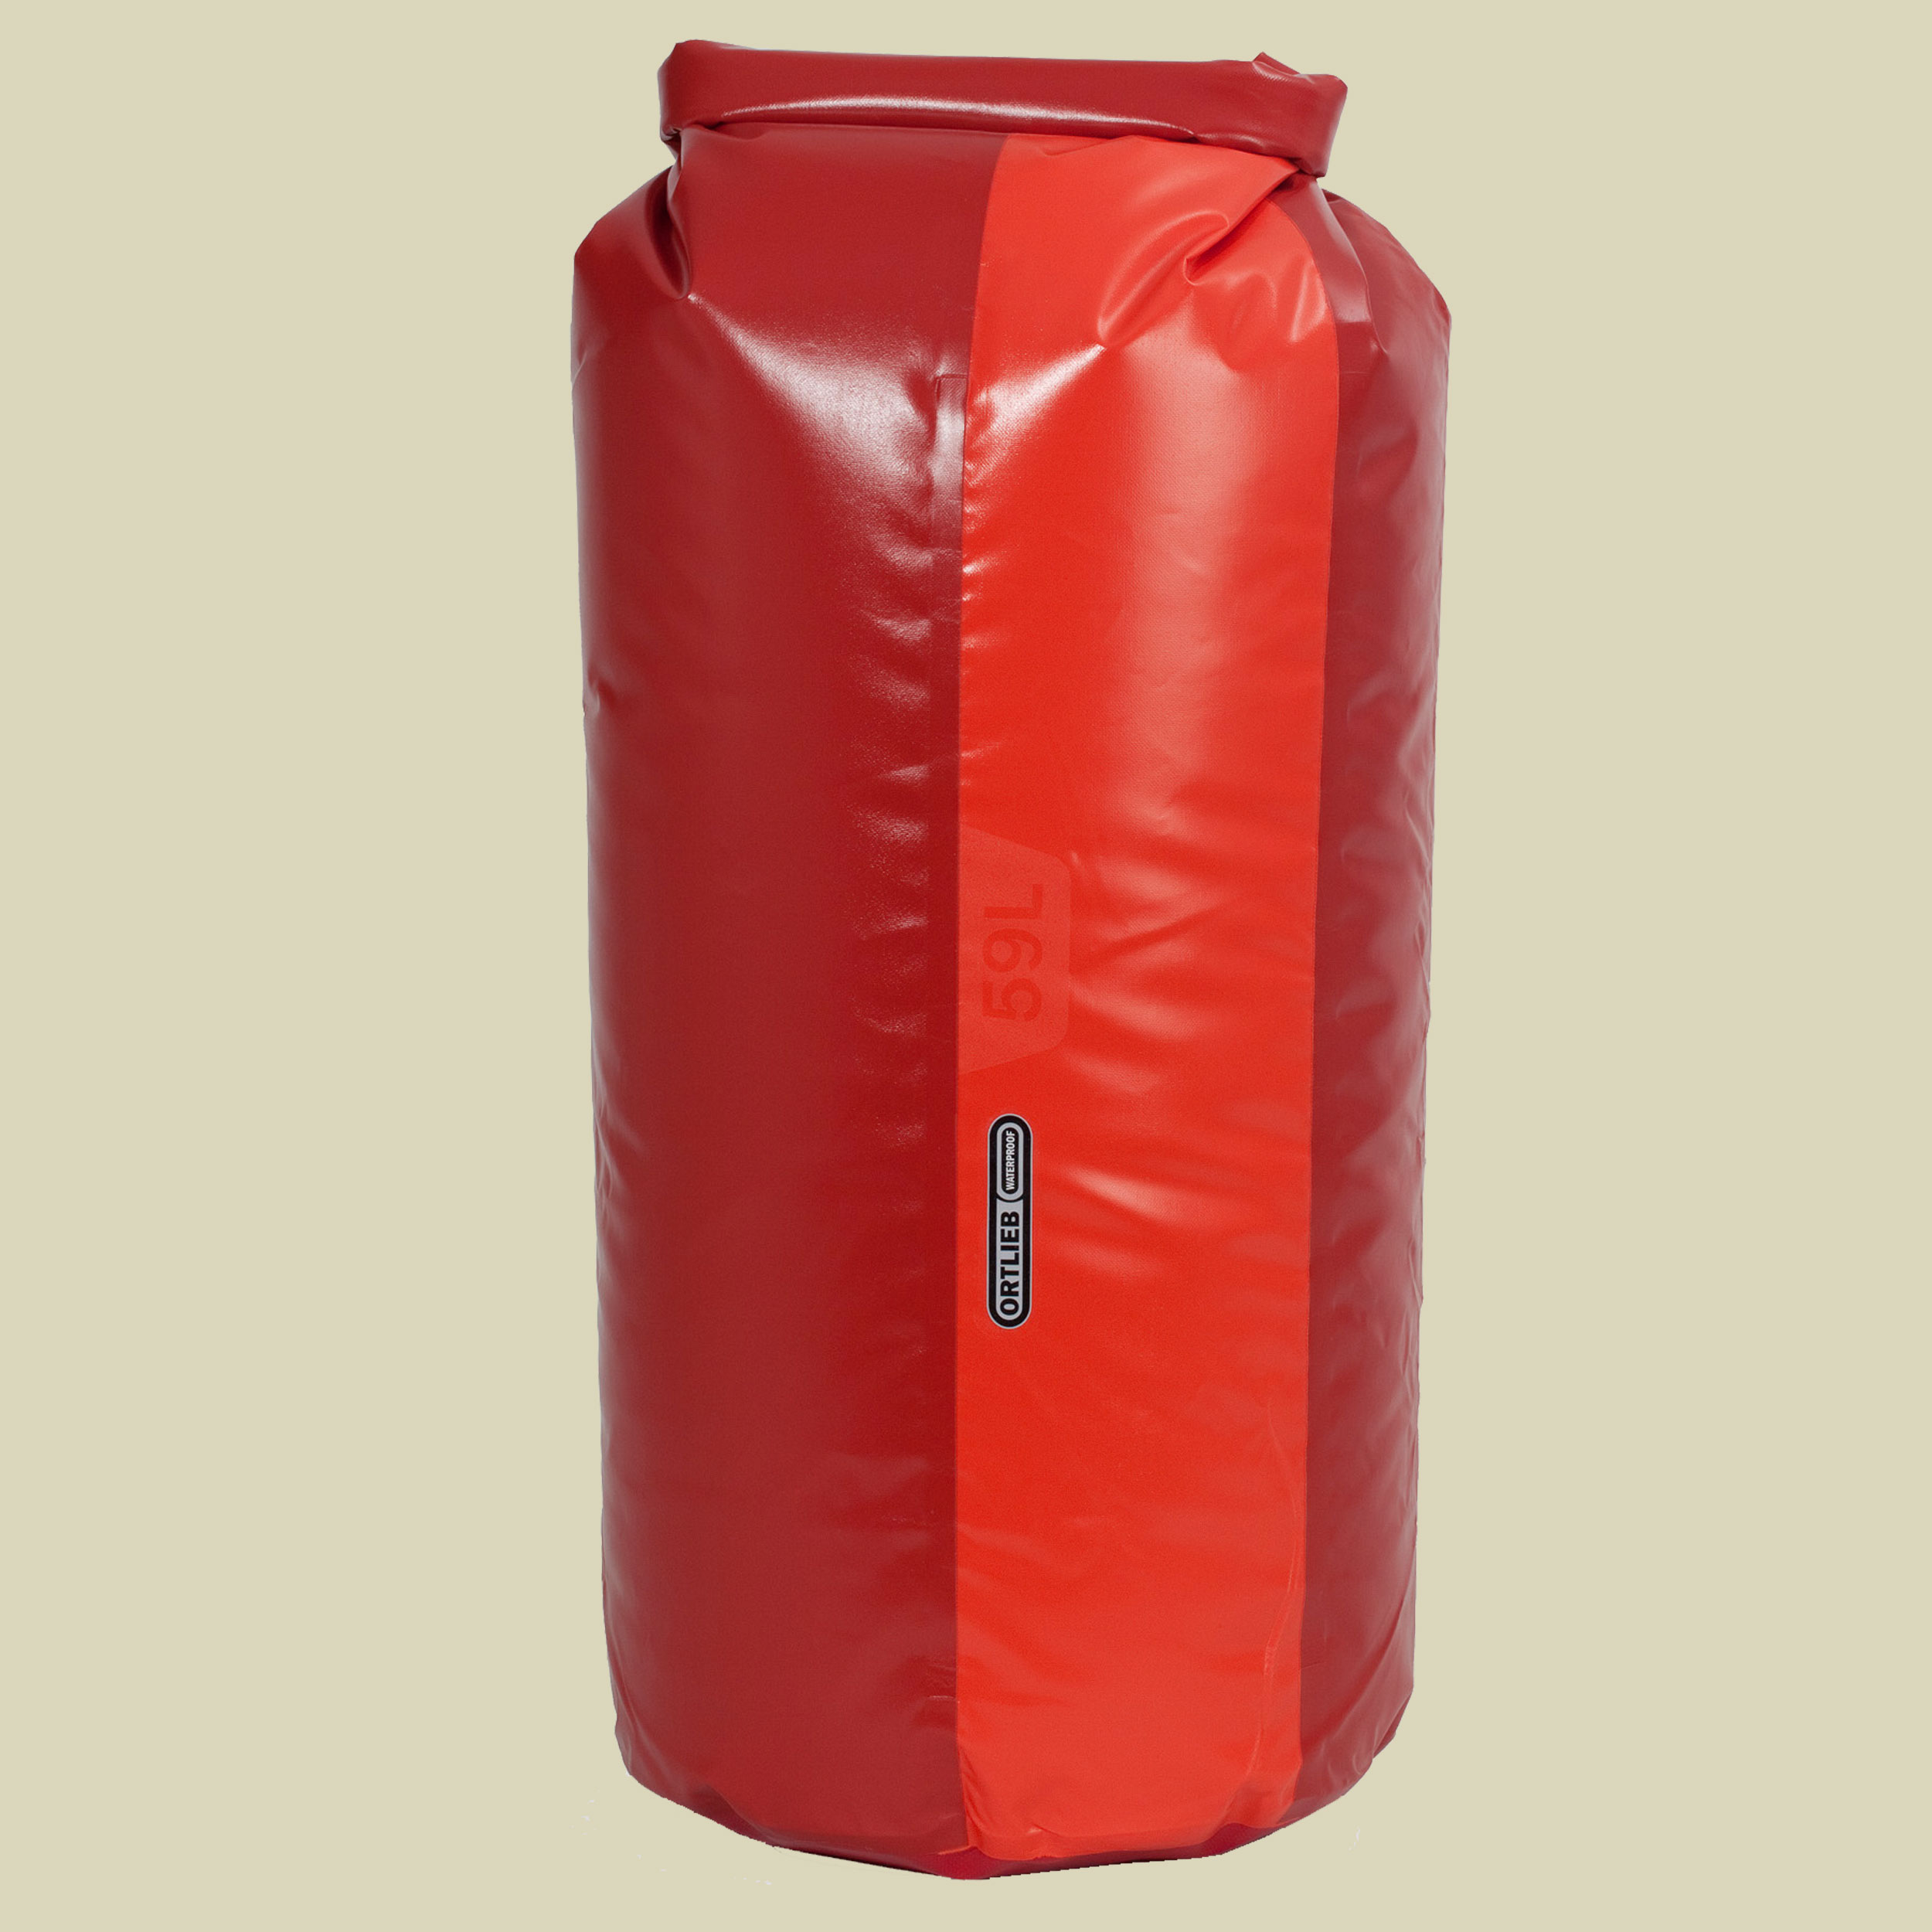 Dry-Bag PD 350 Volumen in Liter 35 Farbe cranberry-signalrot